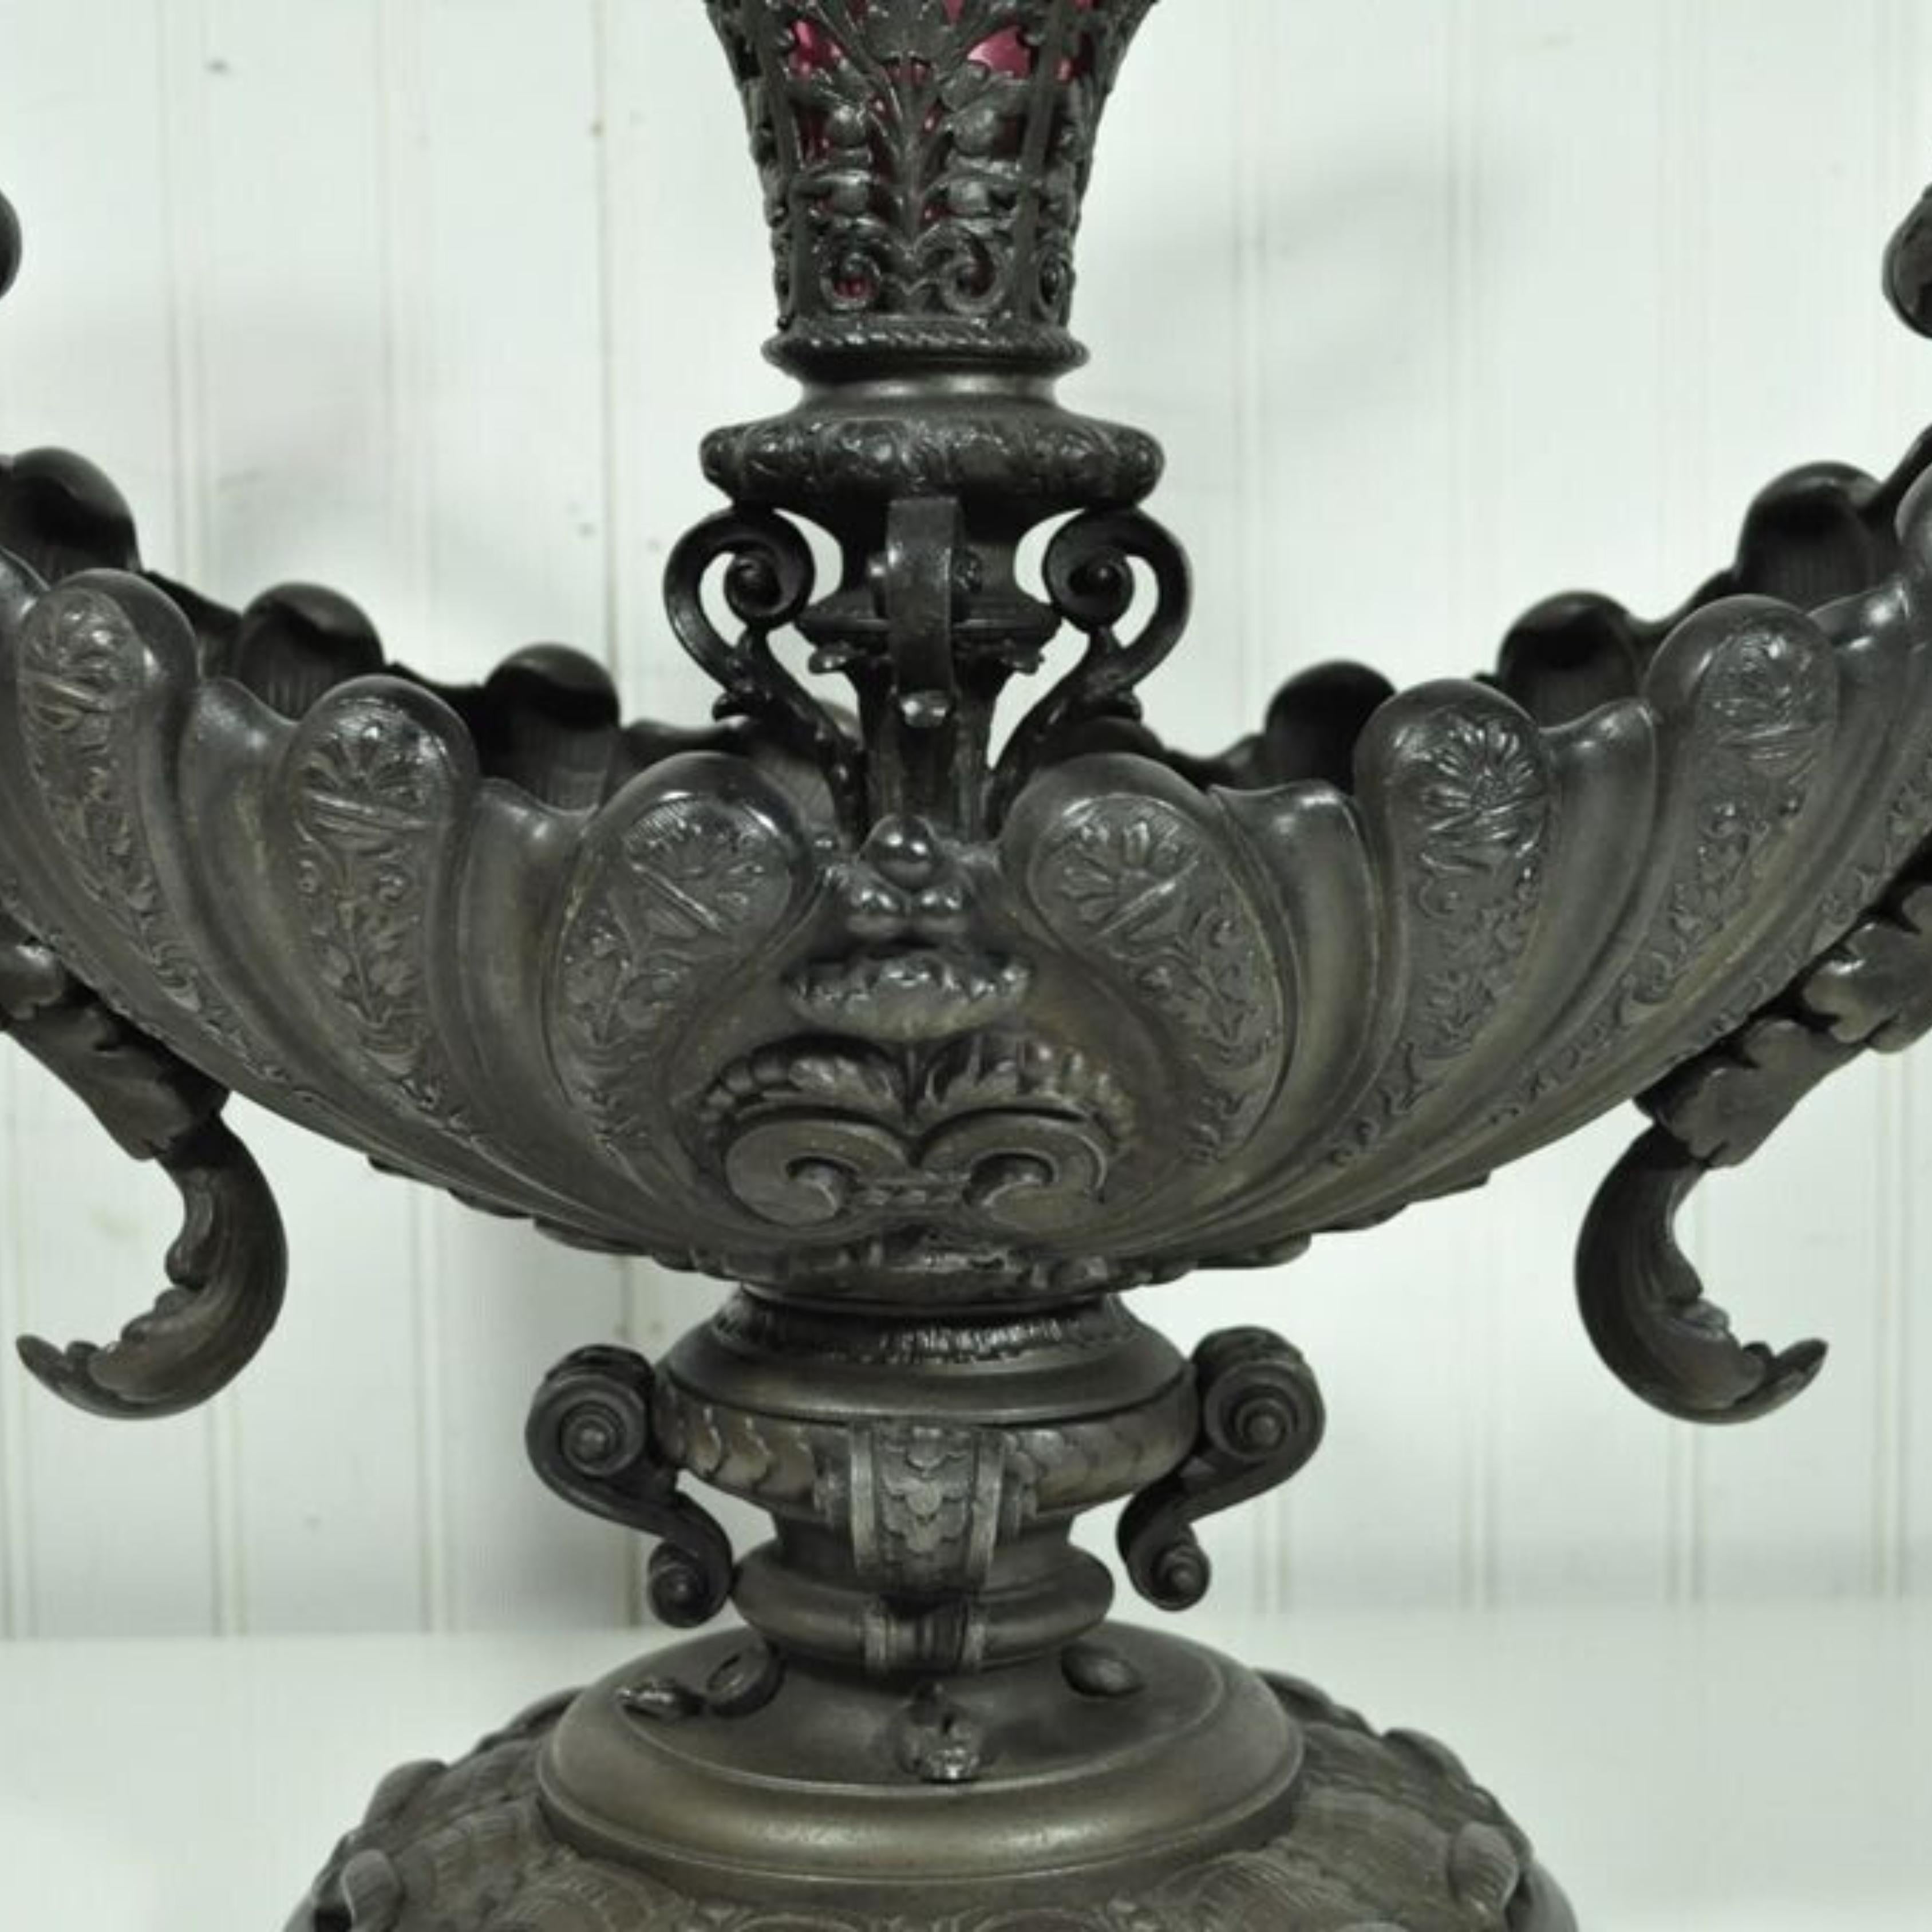 Glass Antique Victorian Spelter & Marble Figural Mermaid Centerpiece Bowl Vase Epergne For Sale